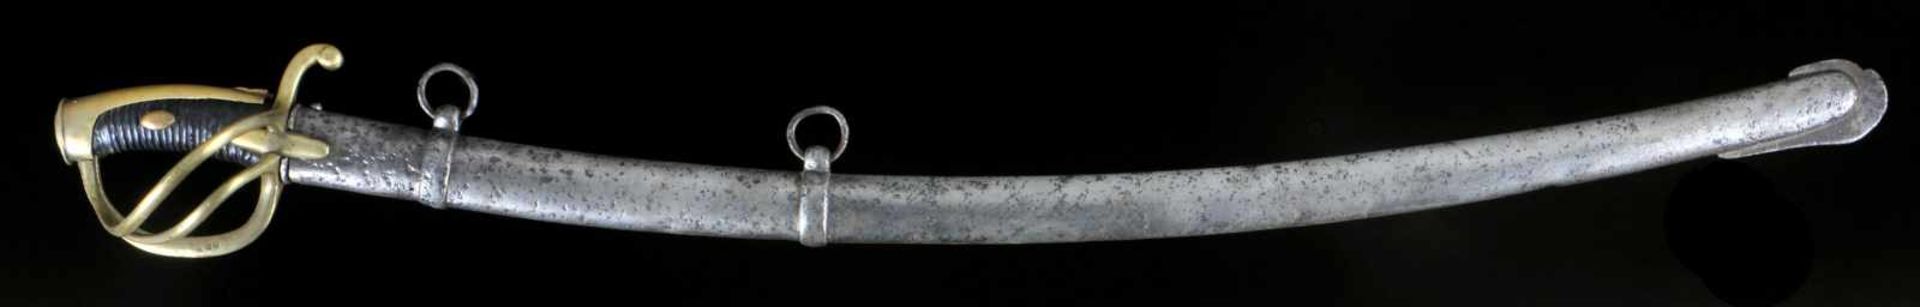 A FRENCH AN XI LIGHT CAVALRY TROOPER'S SWORD, NAPOLEON ARMY. FRANCE, EARLY 19TH CENTURY, EMPIRE - Bild 10 aus 17